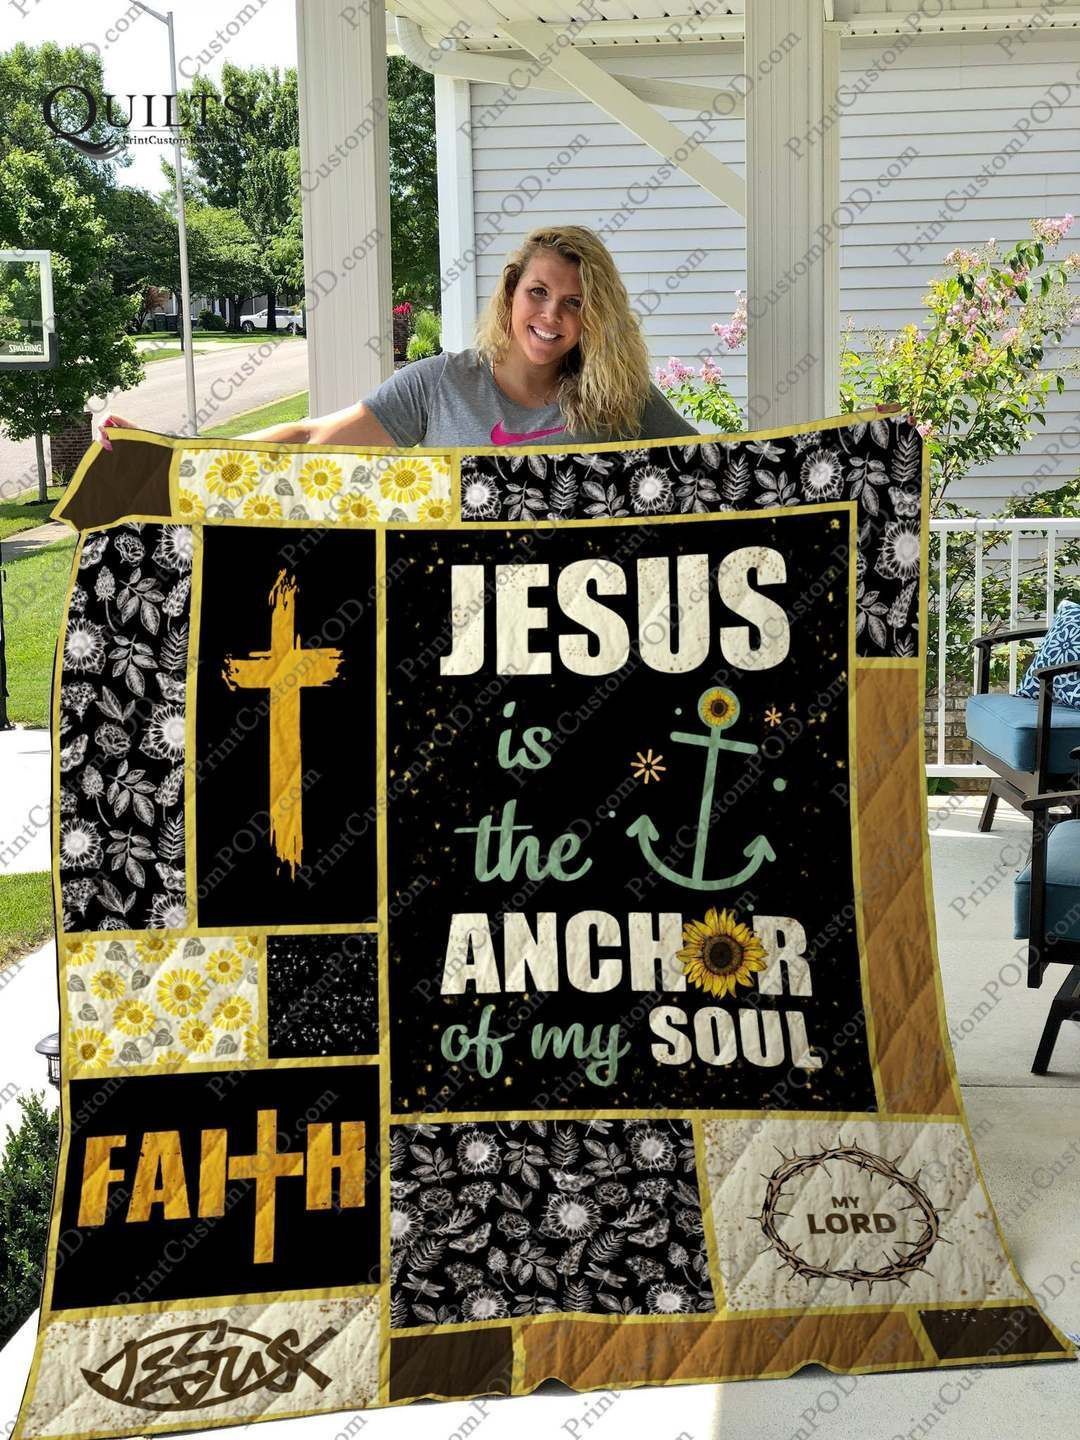 jesus-anchor-ph071102-jji115-awesome-quilt